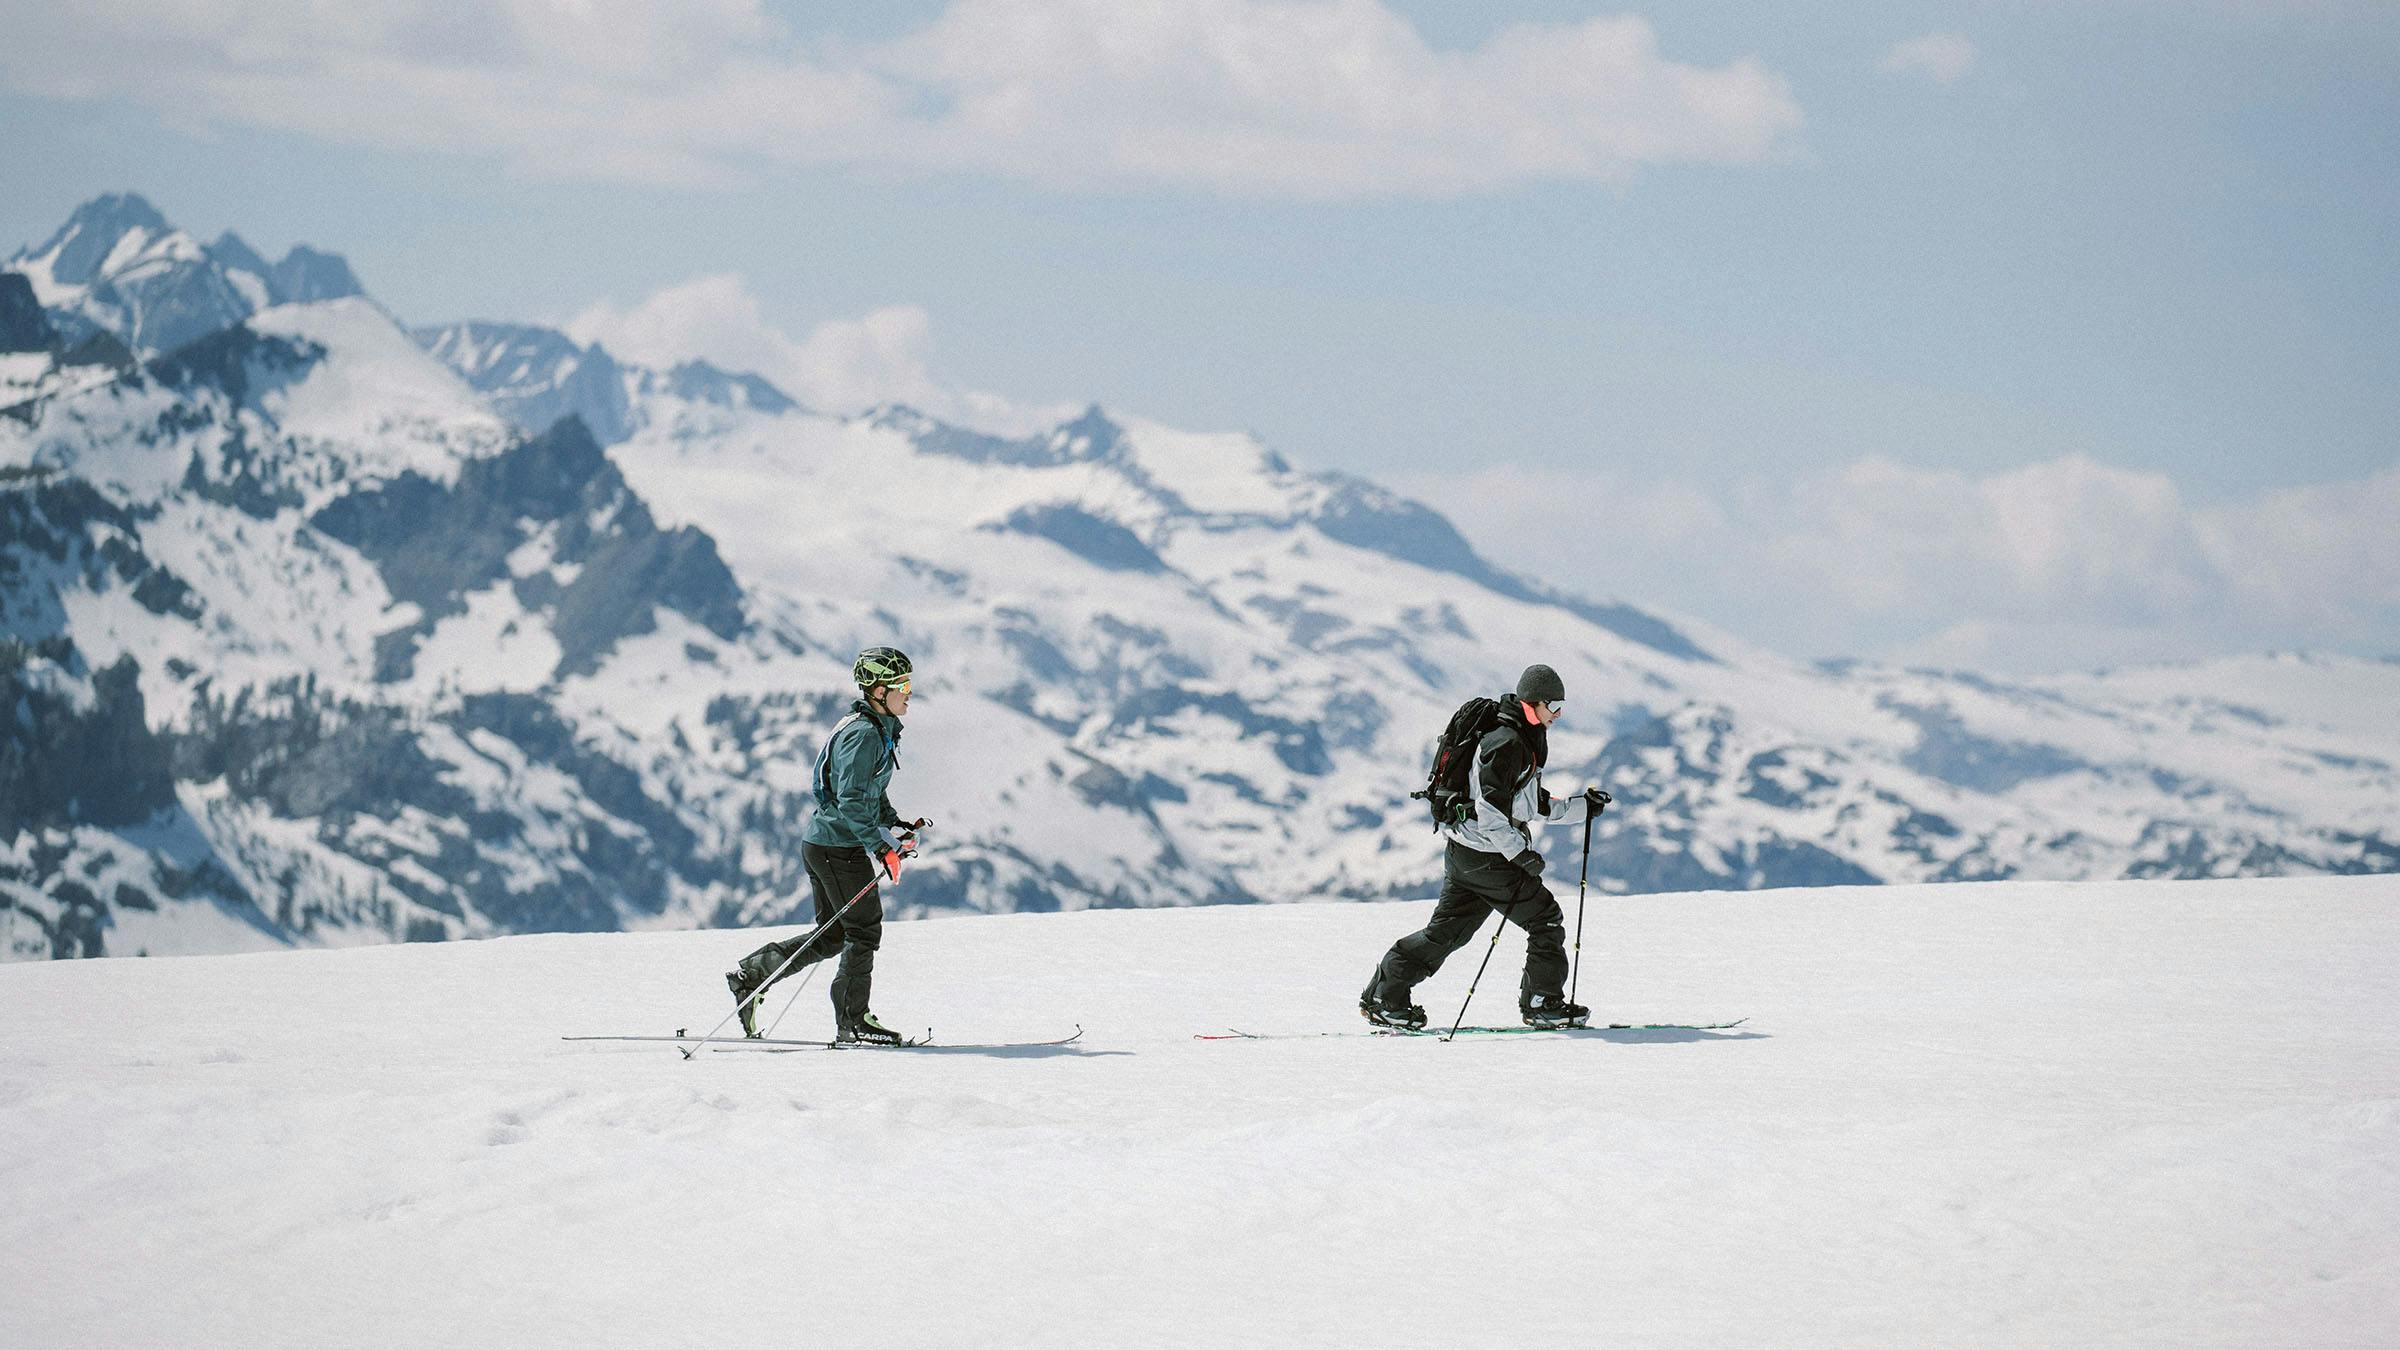 Backcountry skiers with mountains in the background